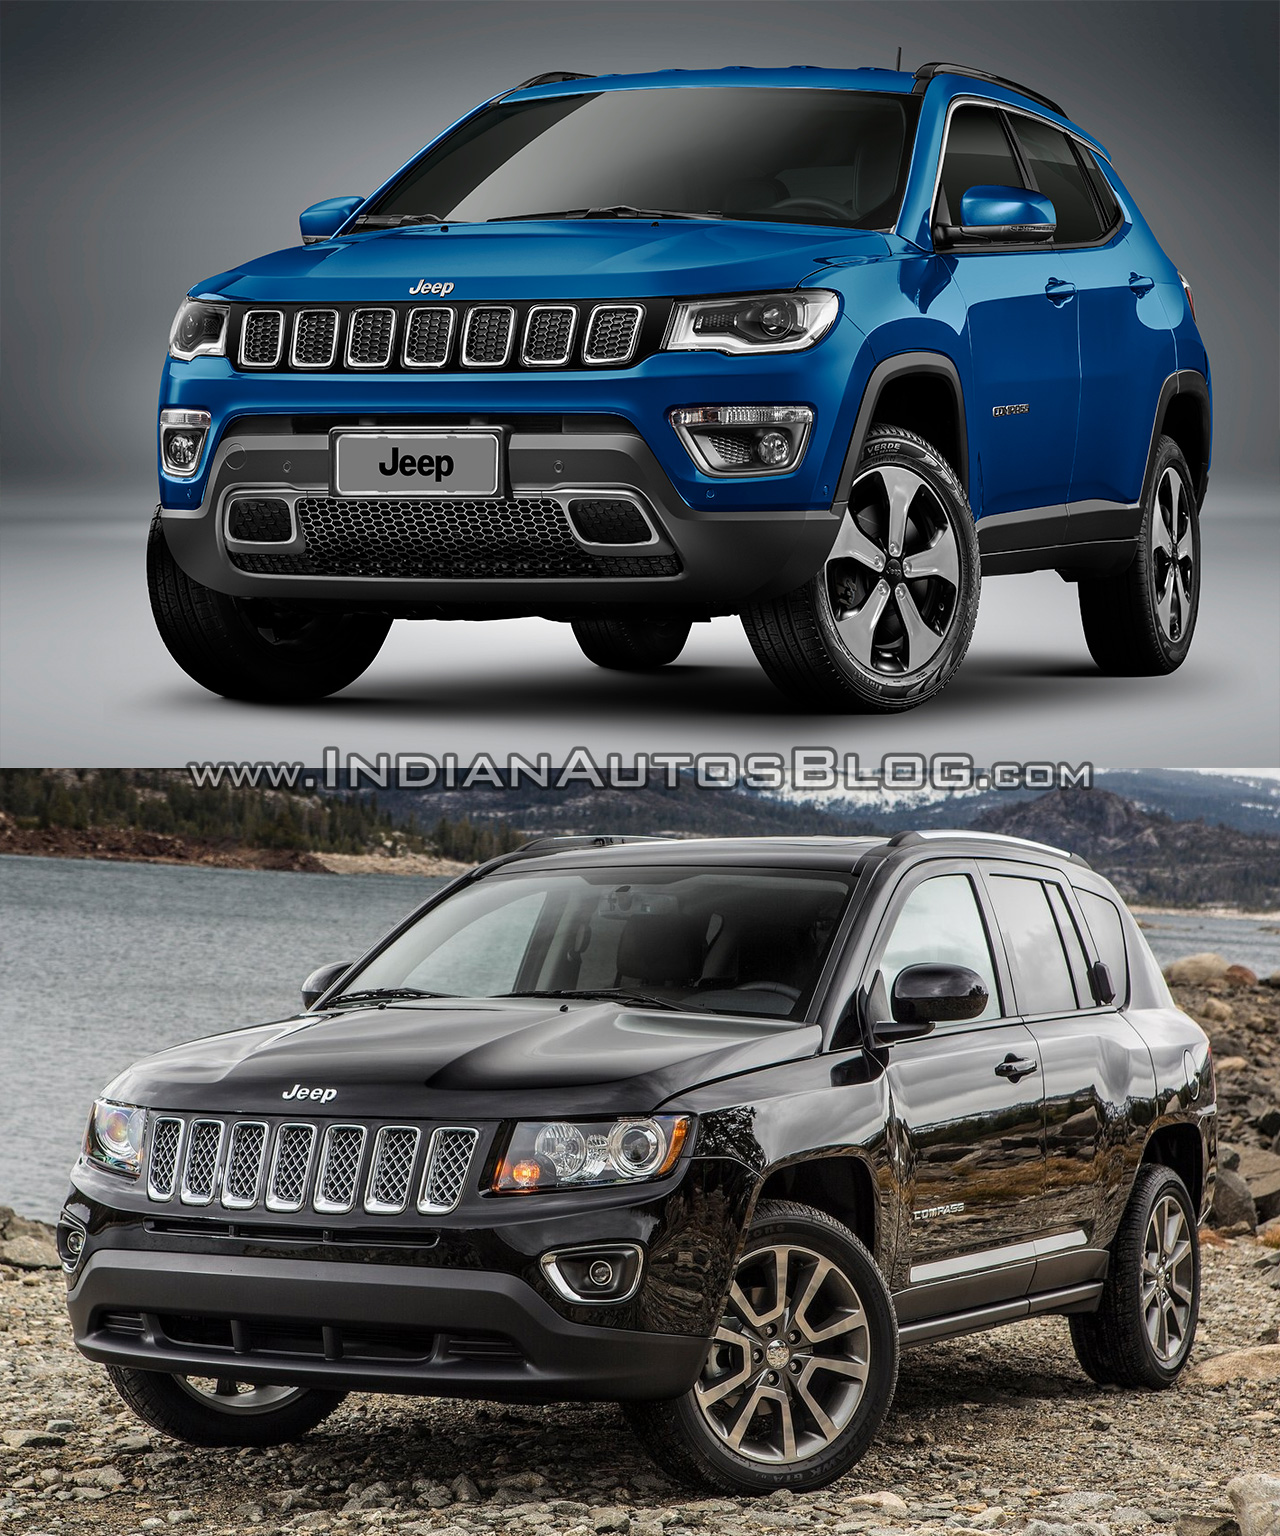 2017 Jeep Compass vs 2011 Jeep Compass - In Images